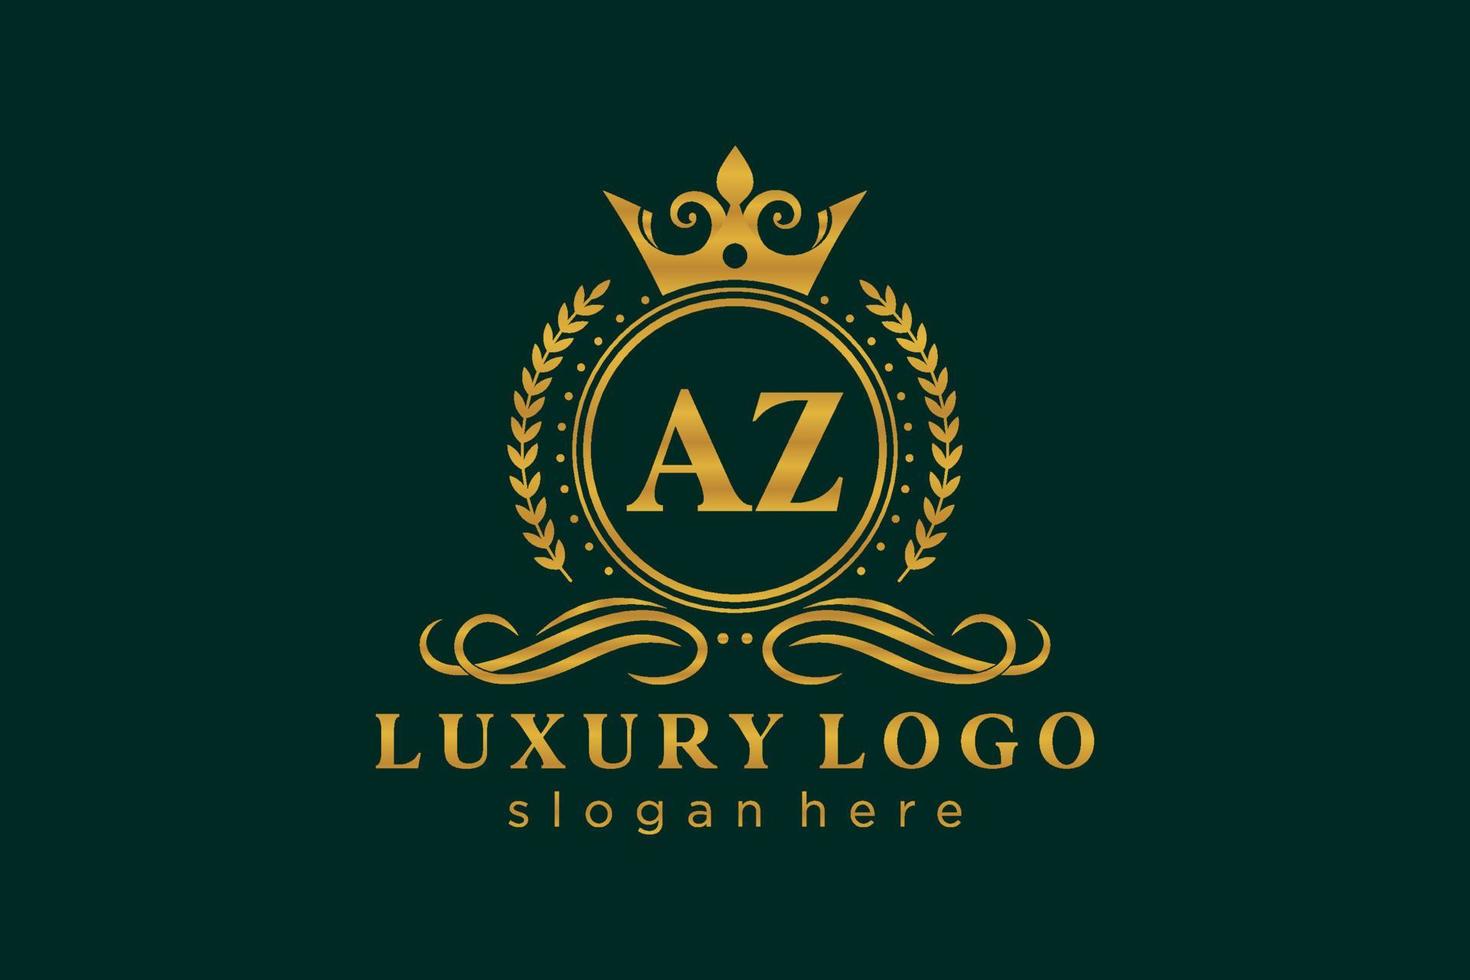 Initial AZ Letter Royal Luxury Logo template in vector art for Restaurant, Royalty, Boutique, Cafe, Hotel, Heraldic, Jewelry, Fashion and other vector illustration.